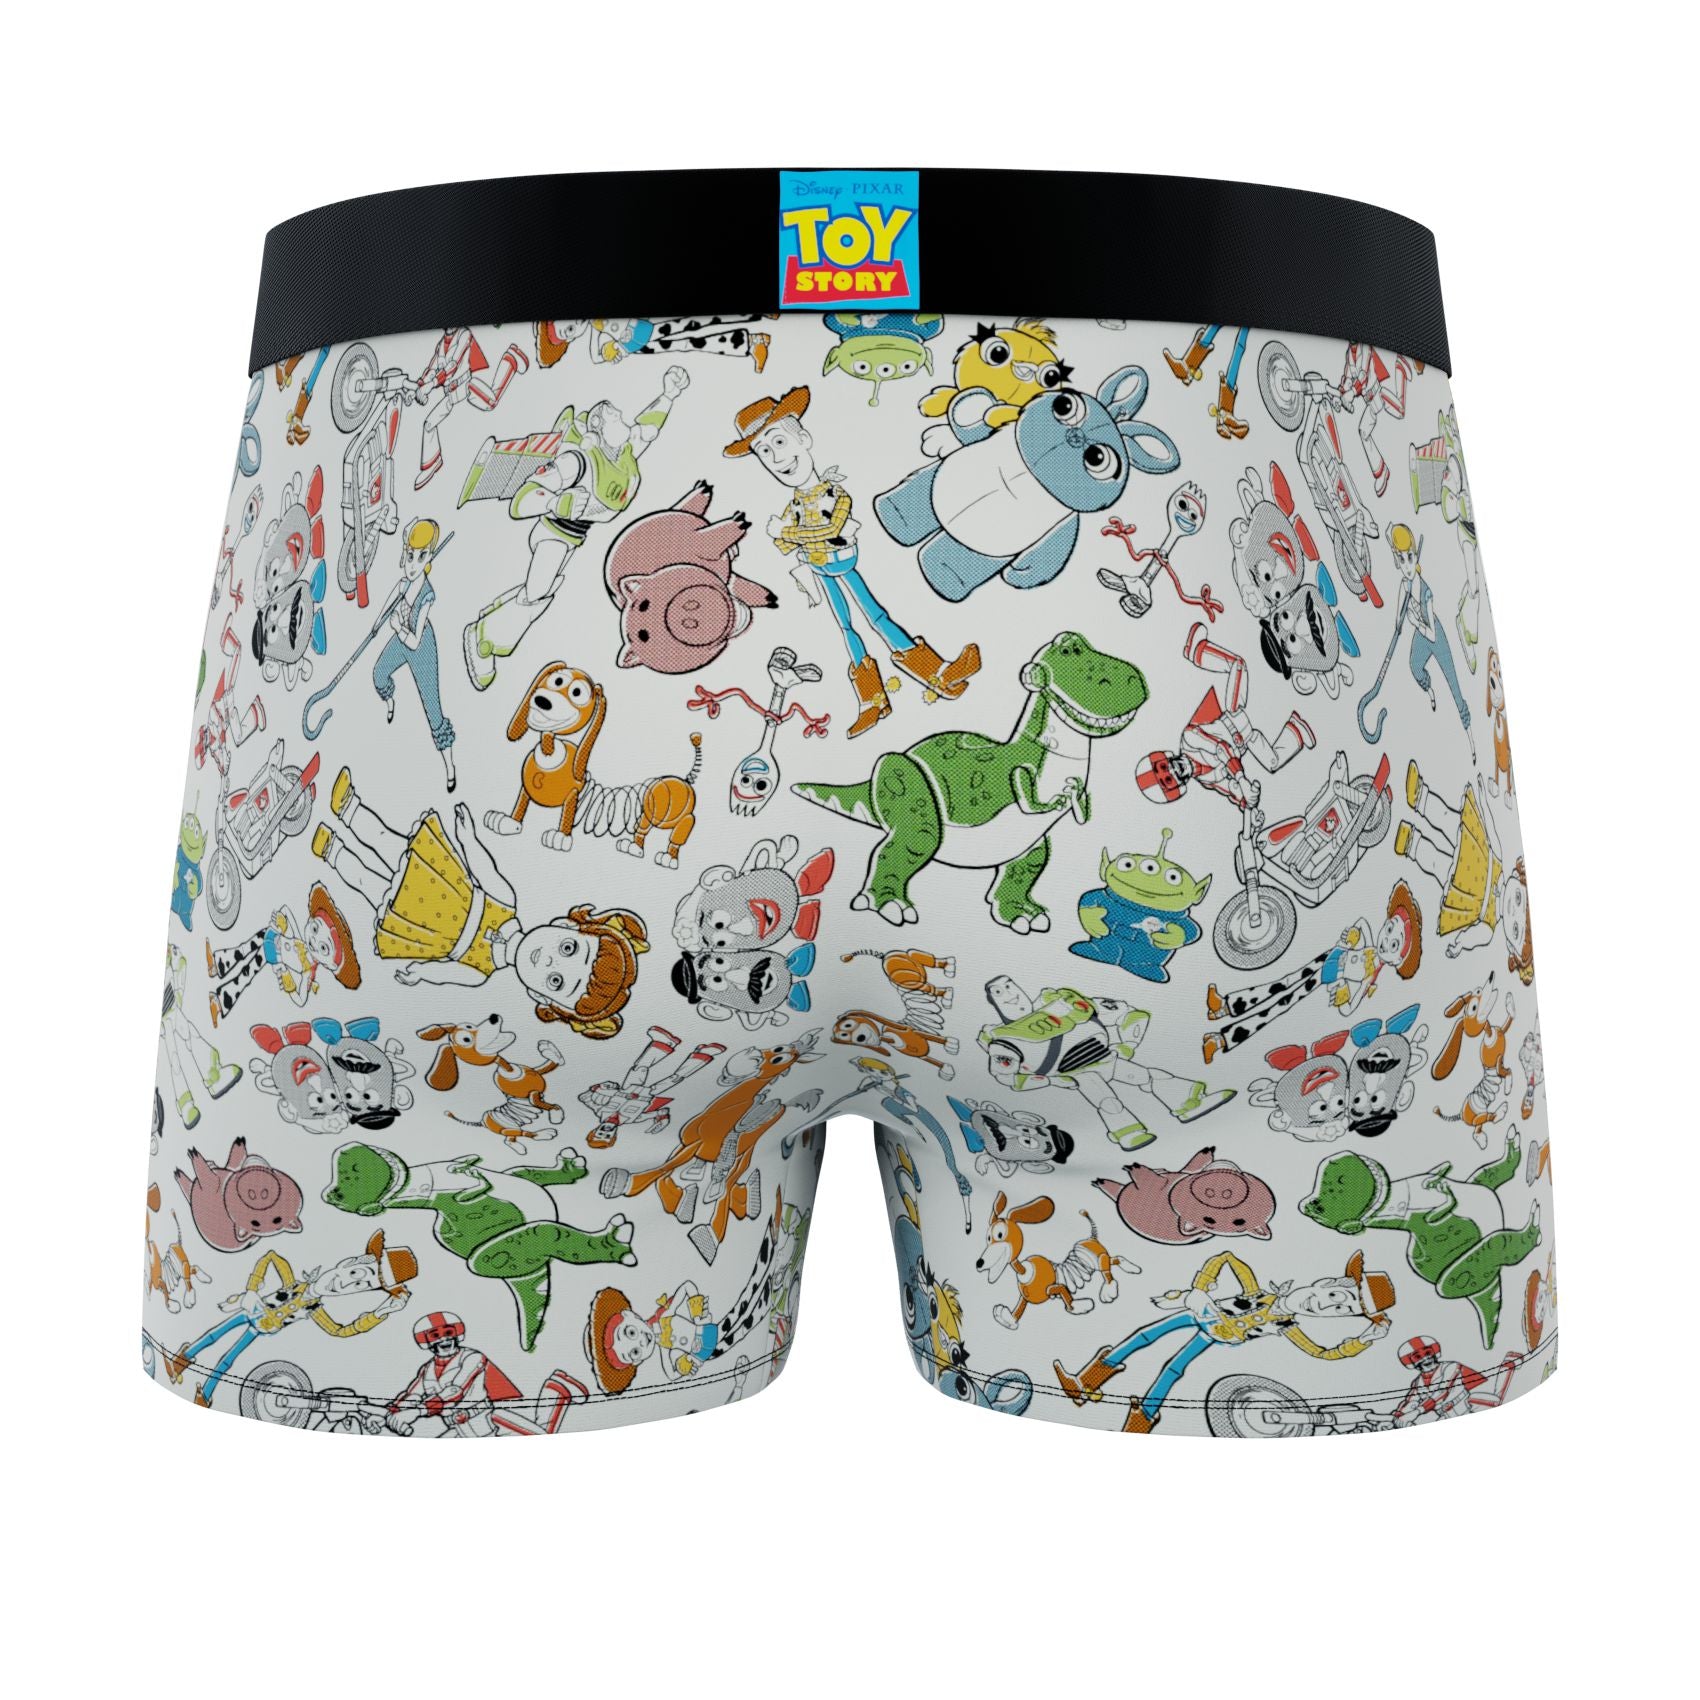 CRAZYBOXER Toy Story All Characters Men's Boxer Briefs (2 pack